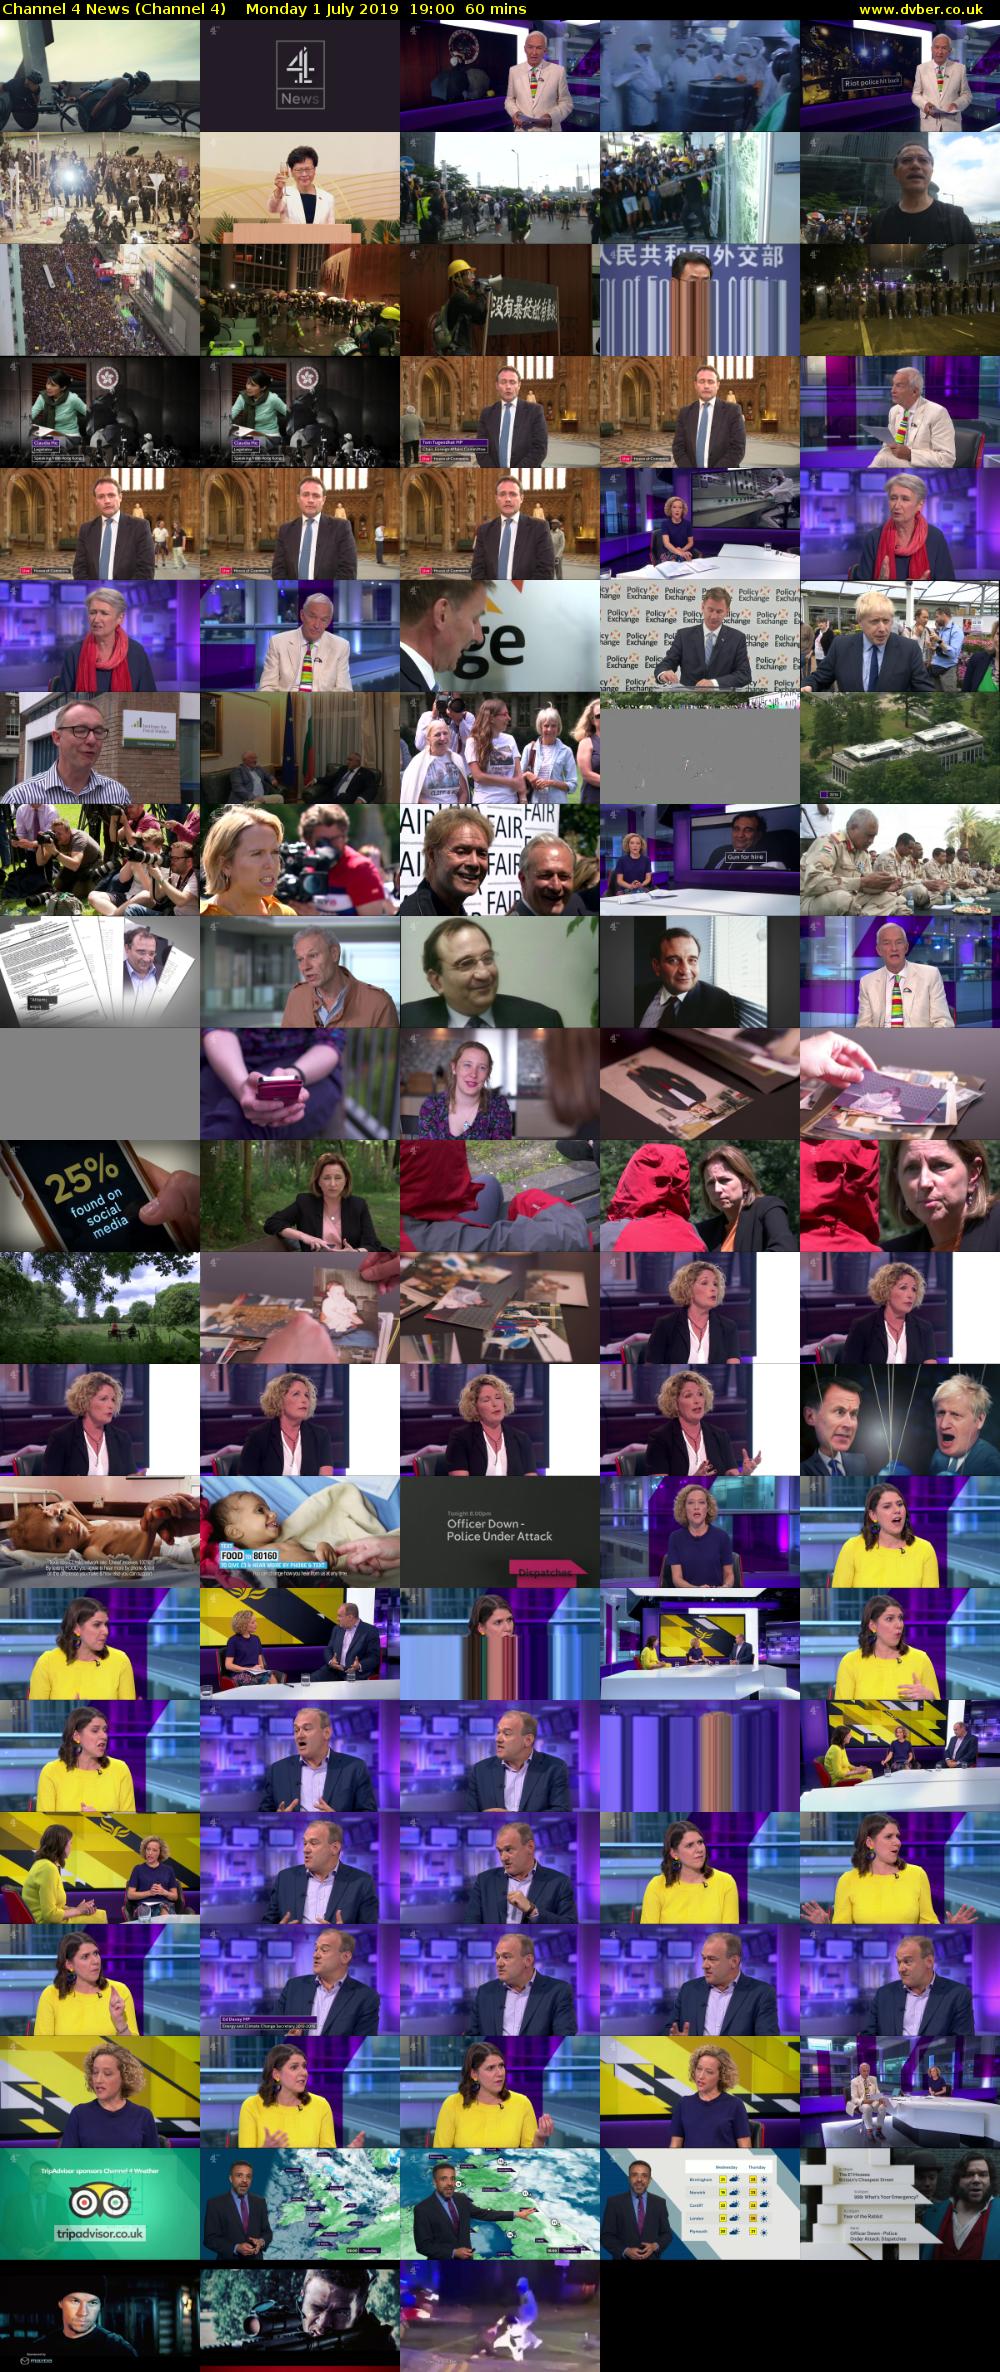 Channel 4 News (Channel 4) Monday 1 July 2019 19:00 - 20:00